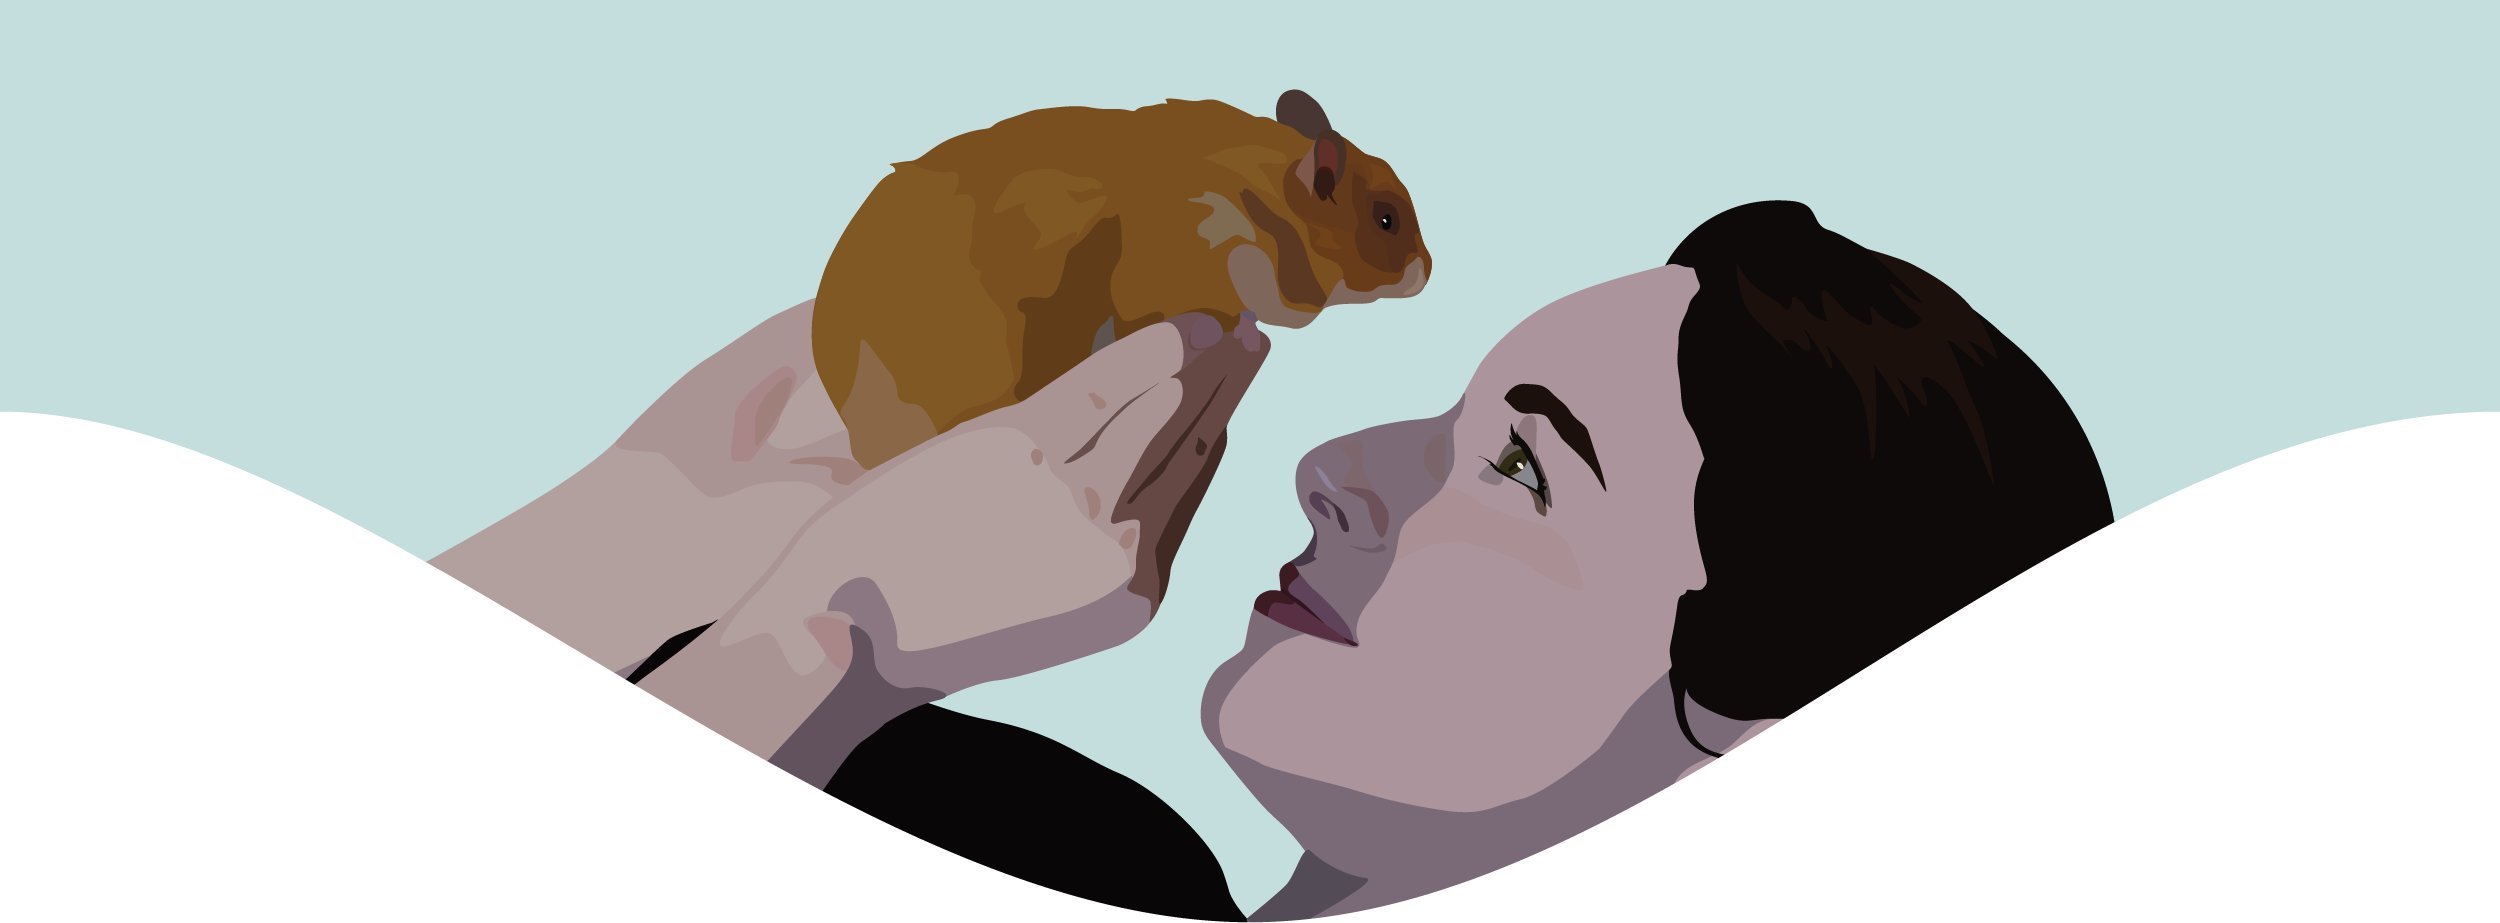 A woman holds a Syrian hamster up in her hands, casting a shadow on her face. She looks at the hamster with a smile.